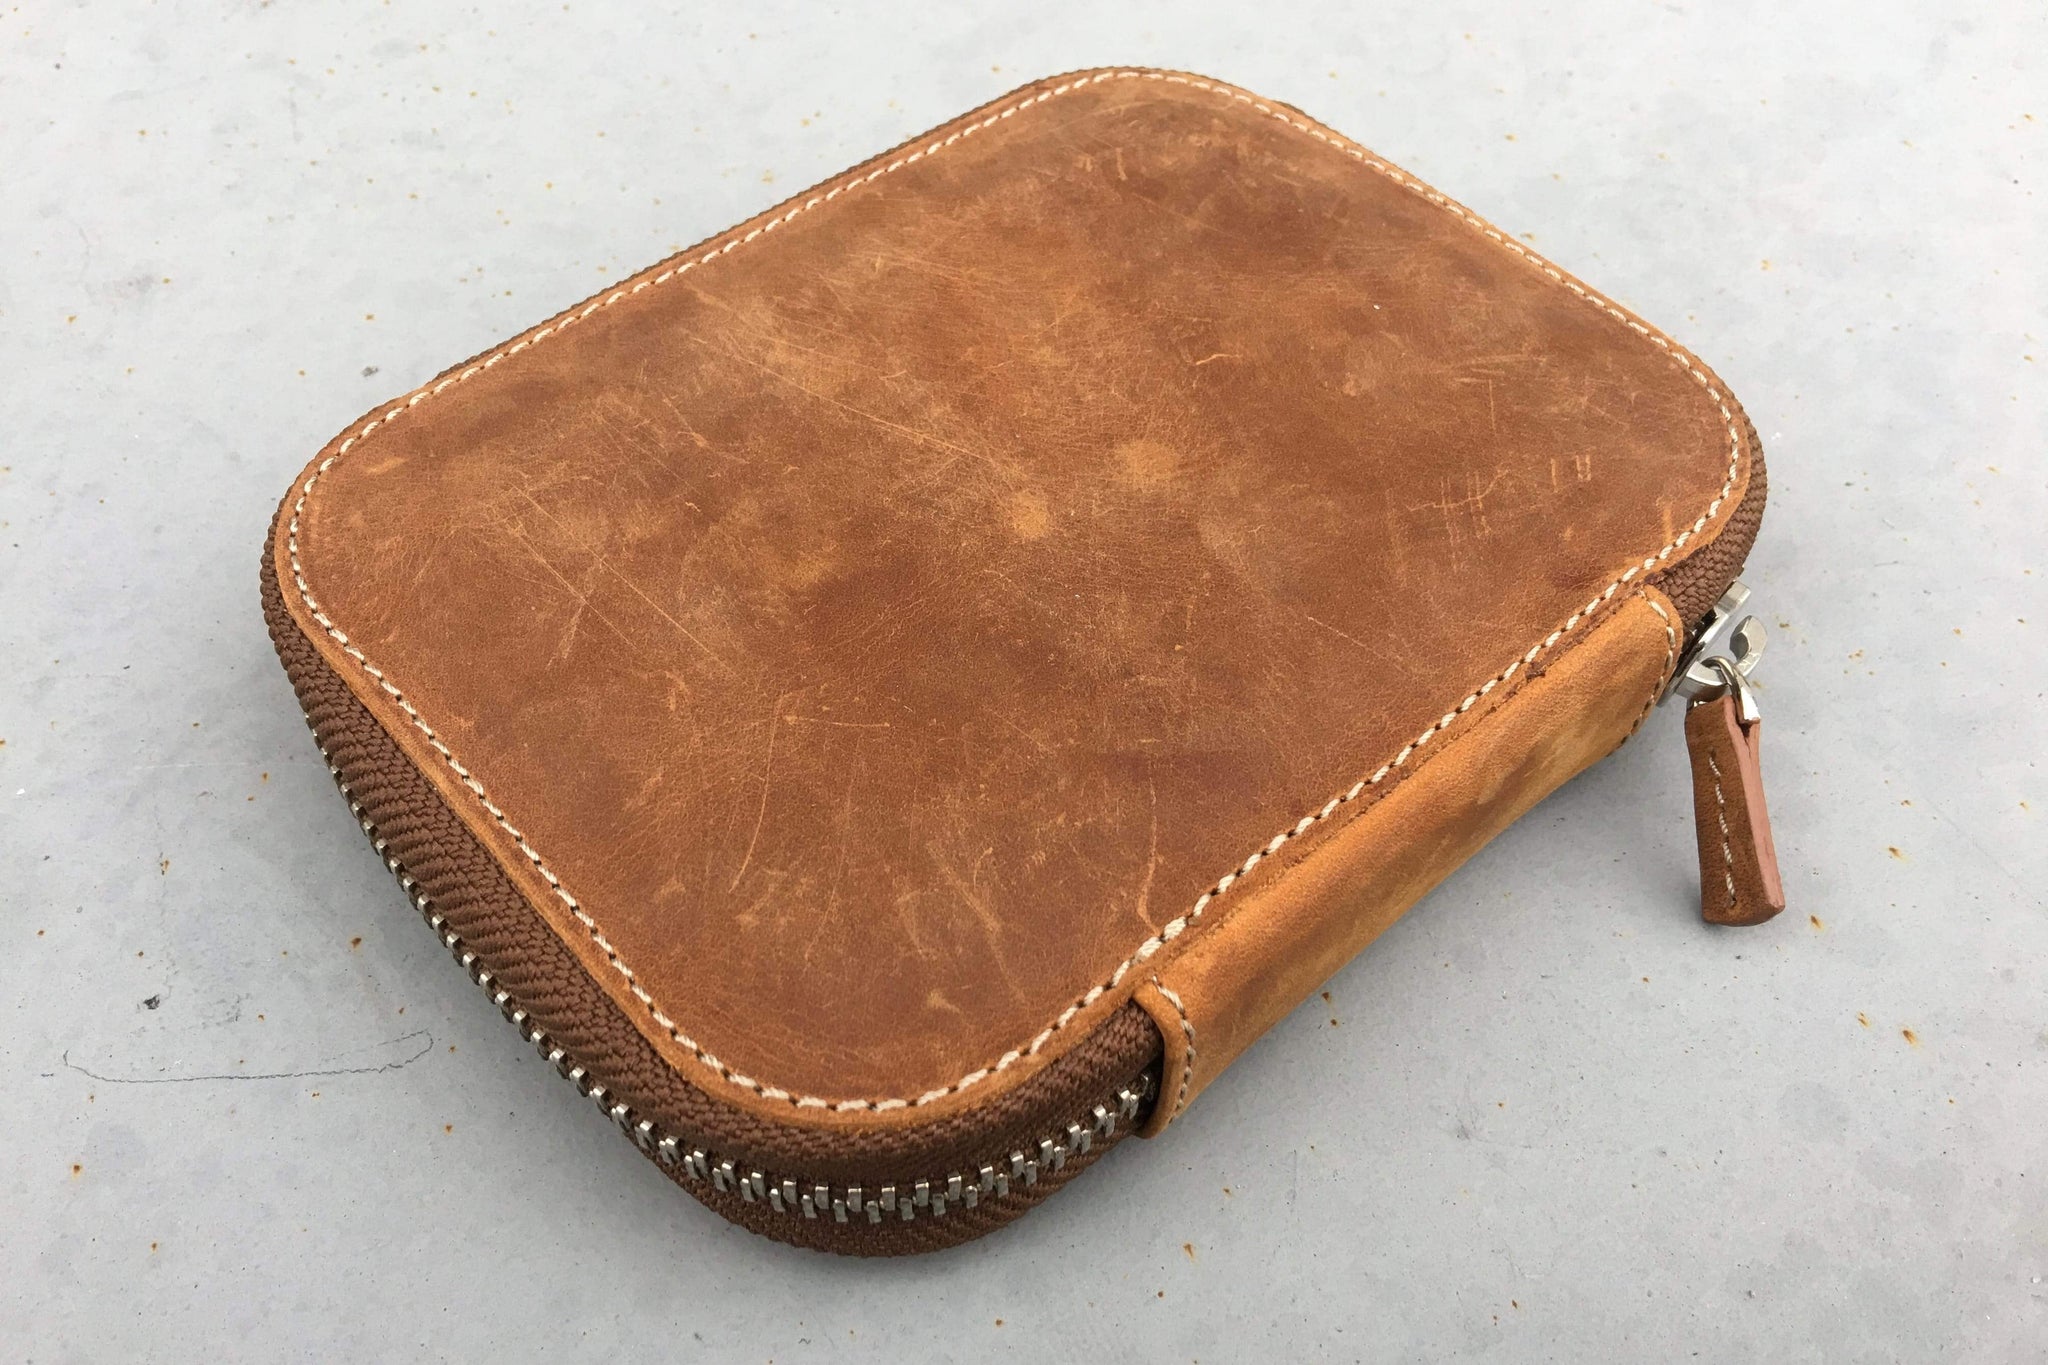 Leather Zippered Writer's Bank Bag - Pen Pouch - Crazy Horse Brown - Galen  Leather